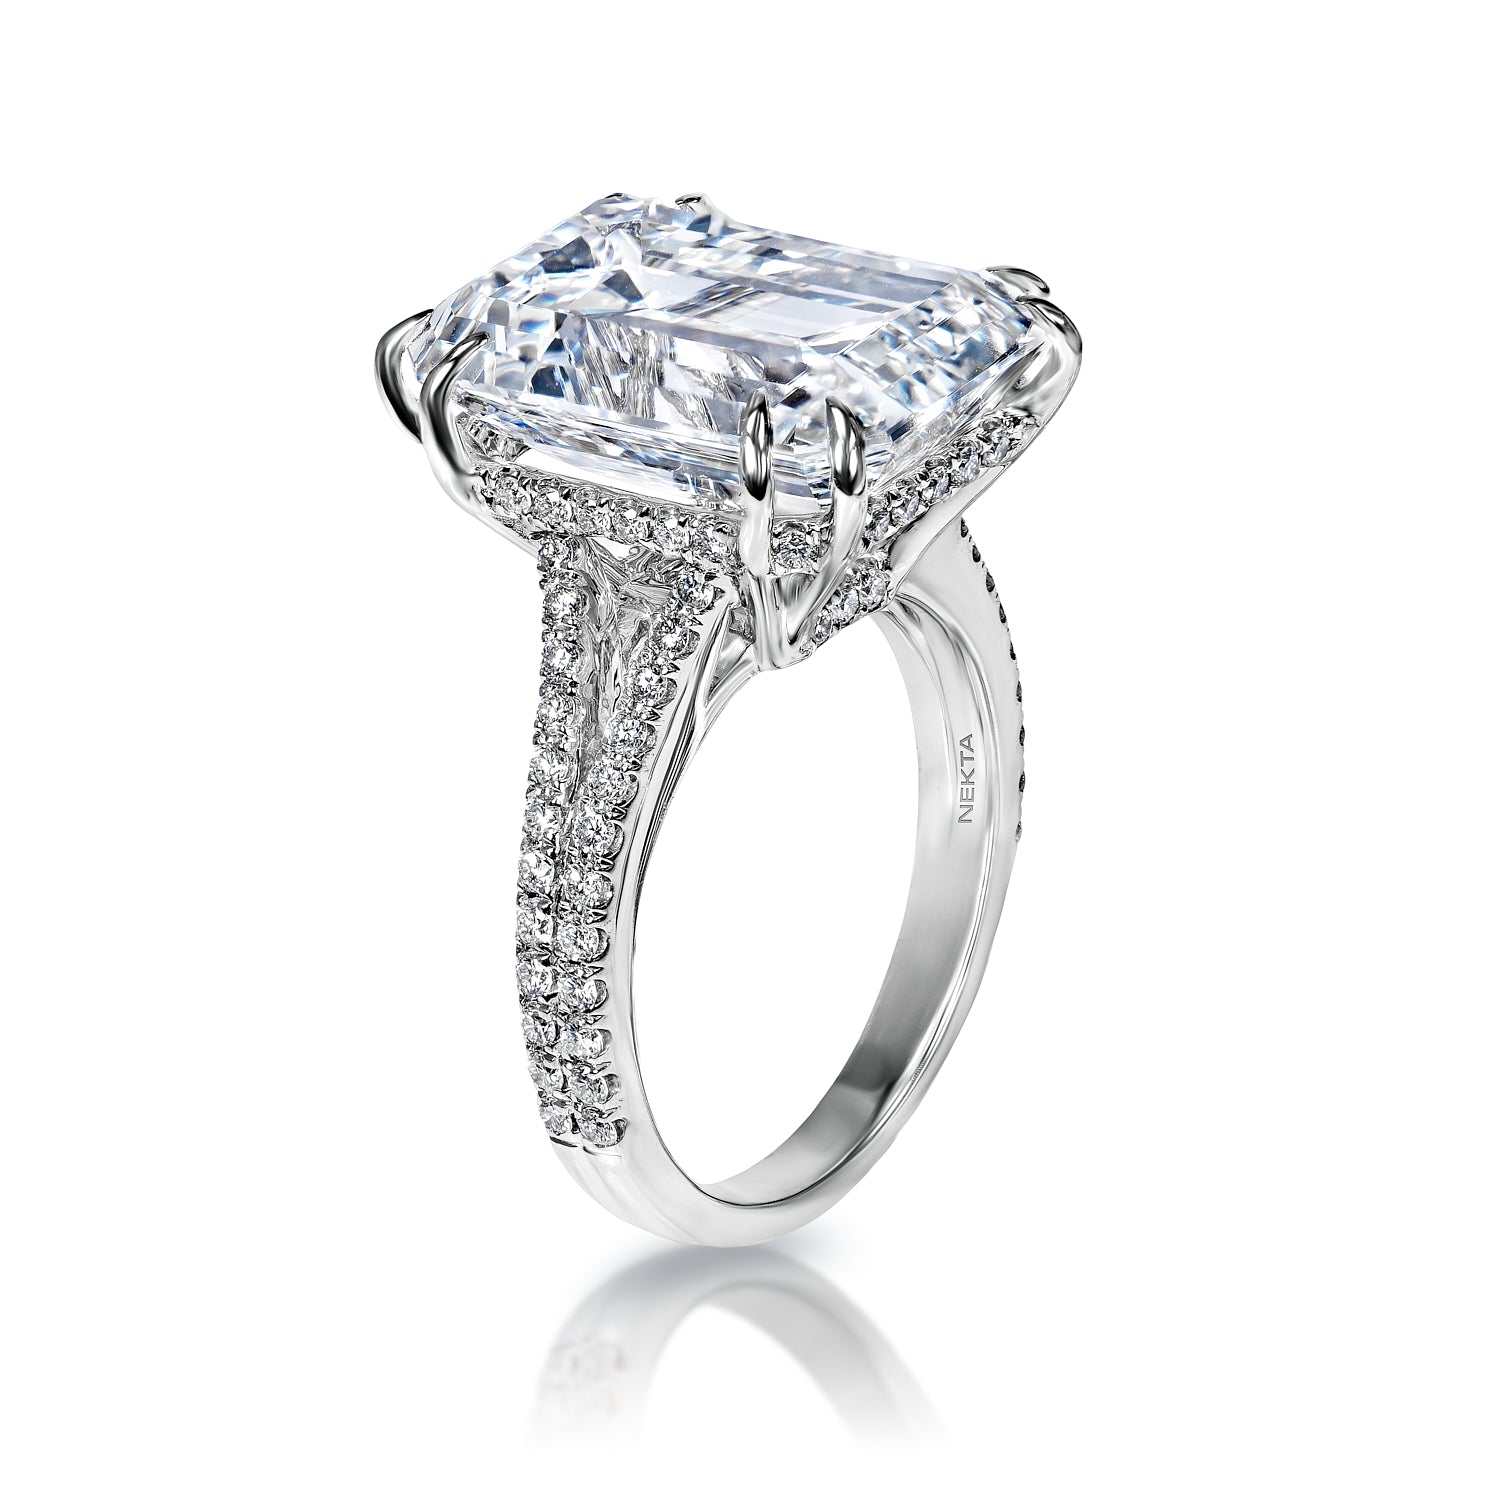 Kayleigh 11 Carats G VVS1 Emerald Cut Diamond Engagement Ring in 18k White Gold Side View